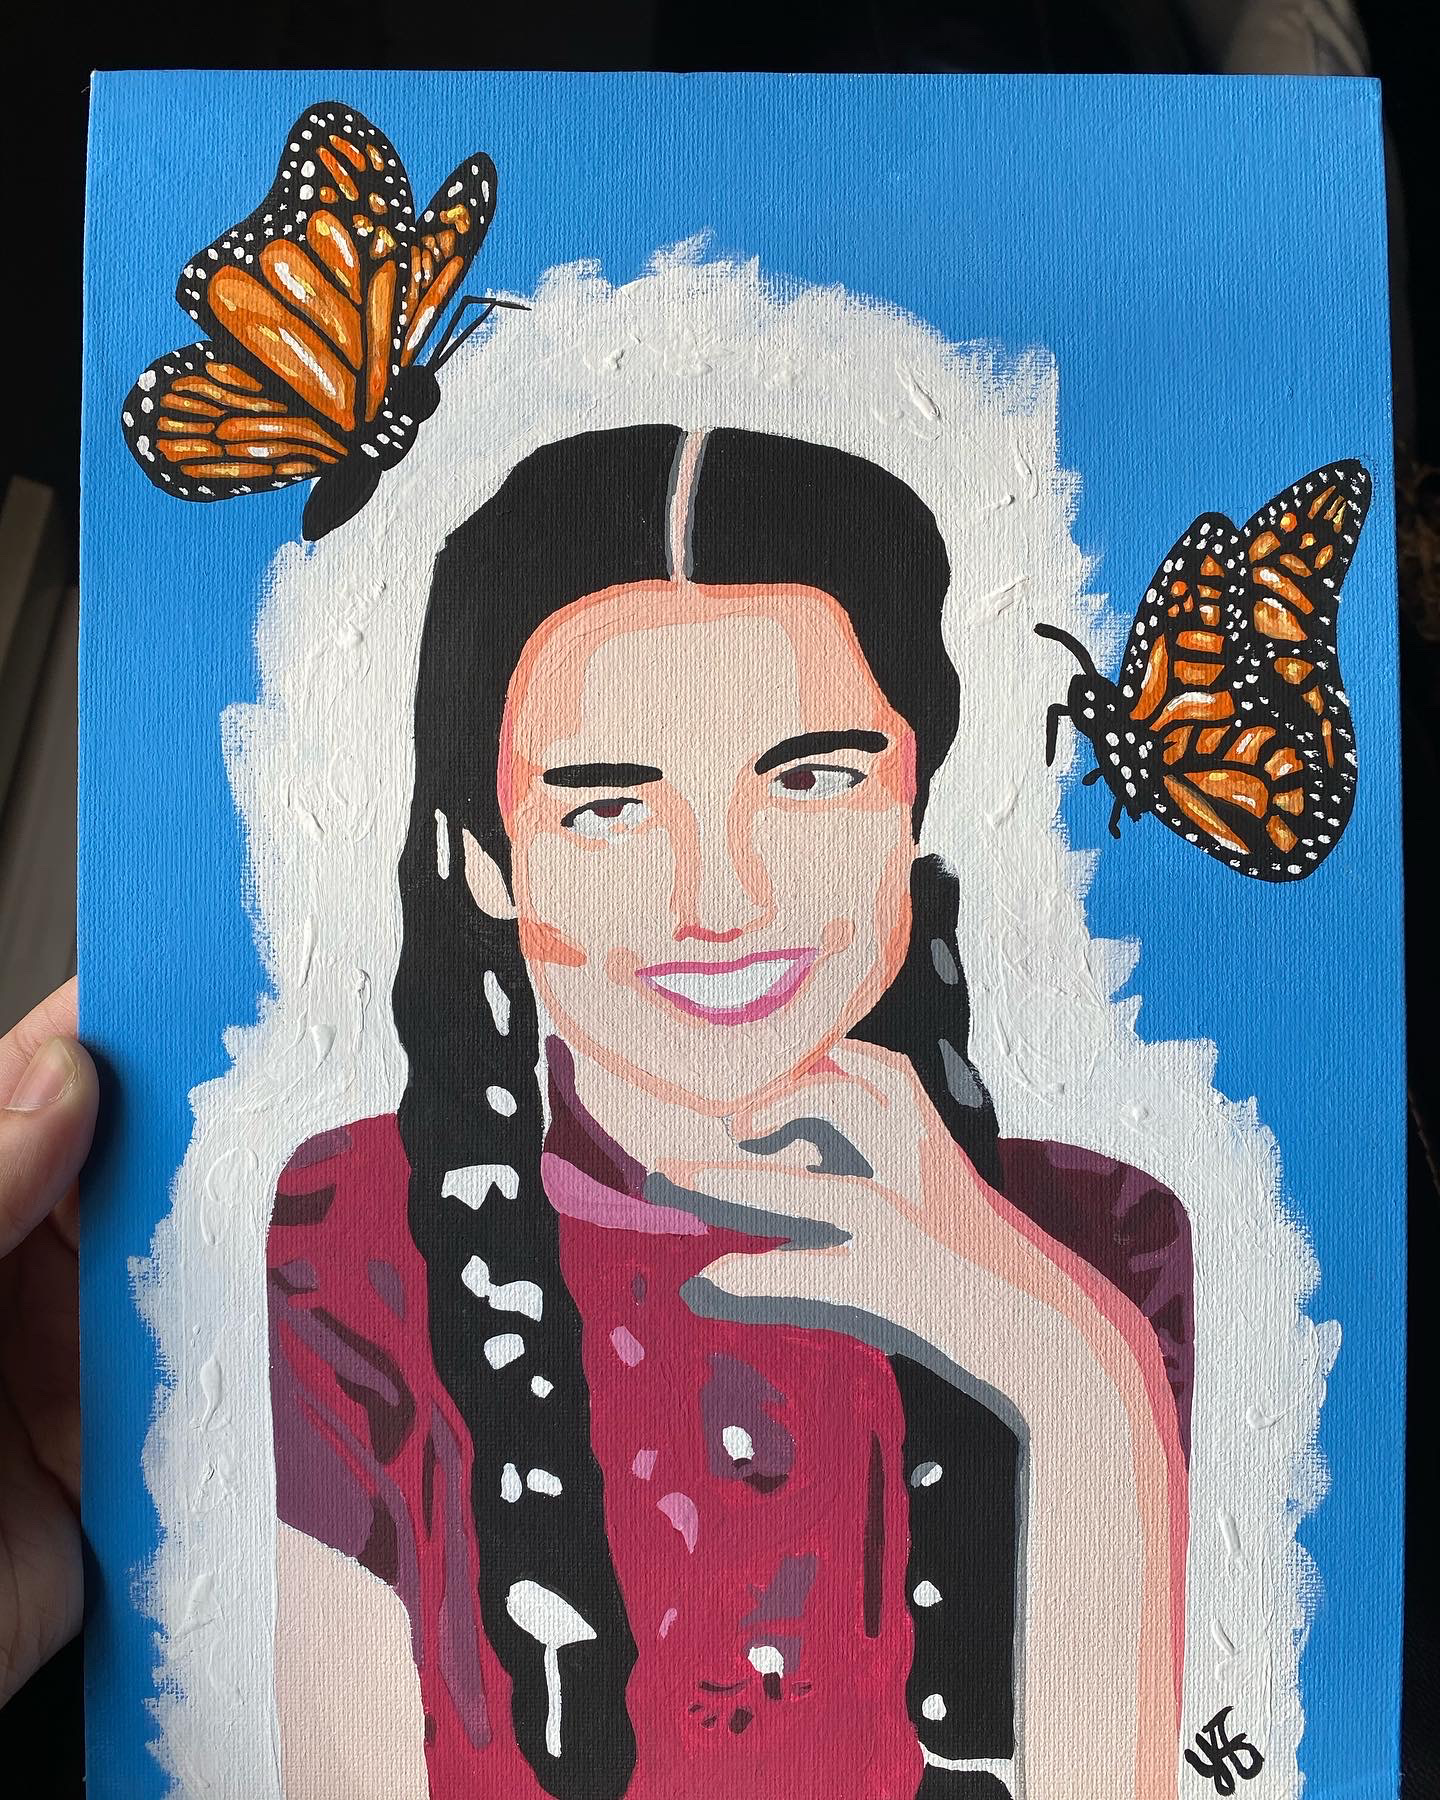 A portrait of Teresa-Maria Mirabal against a blue background filled with butterflies. 